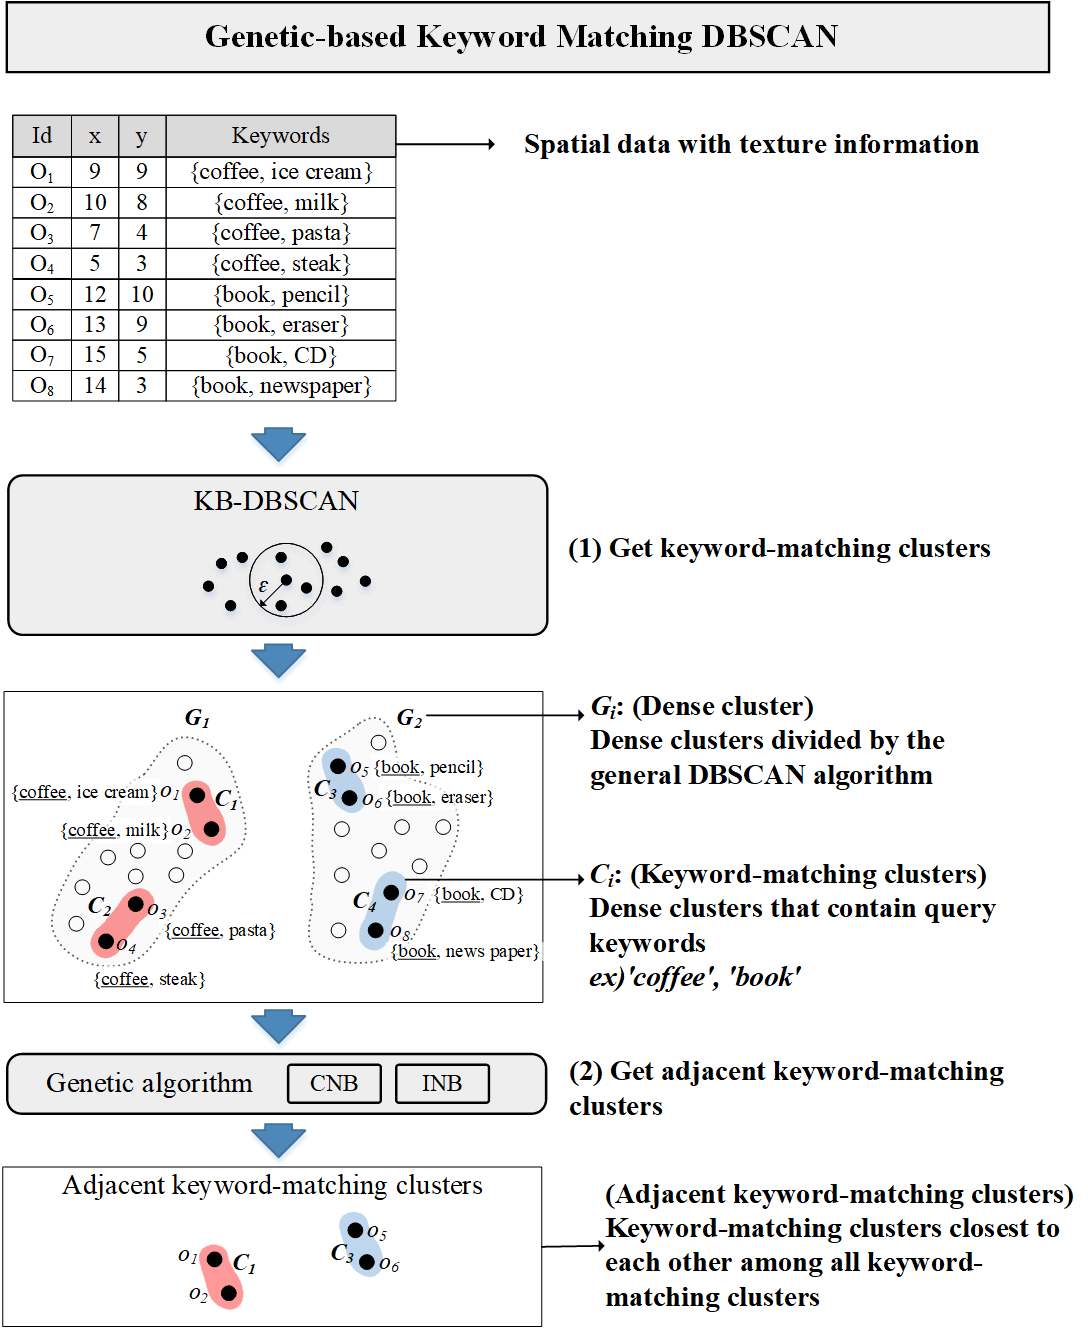 Genetic-Based Keyword Matching DBSCAN in IoT for Discovering Adjacent Clusters